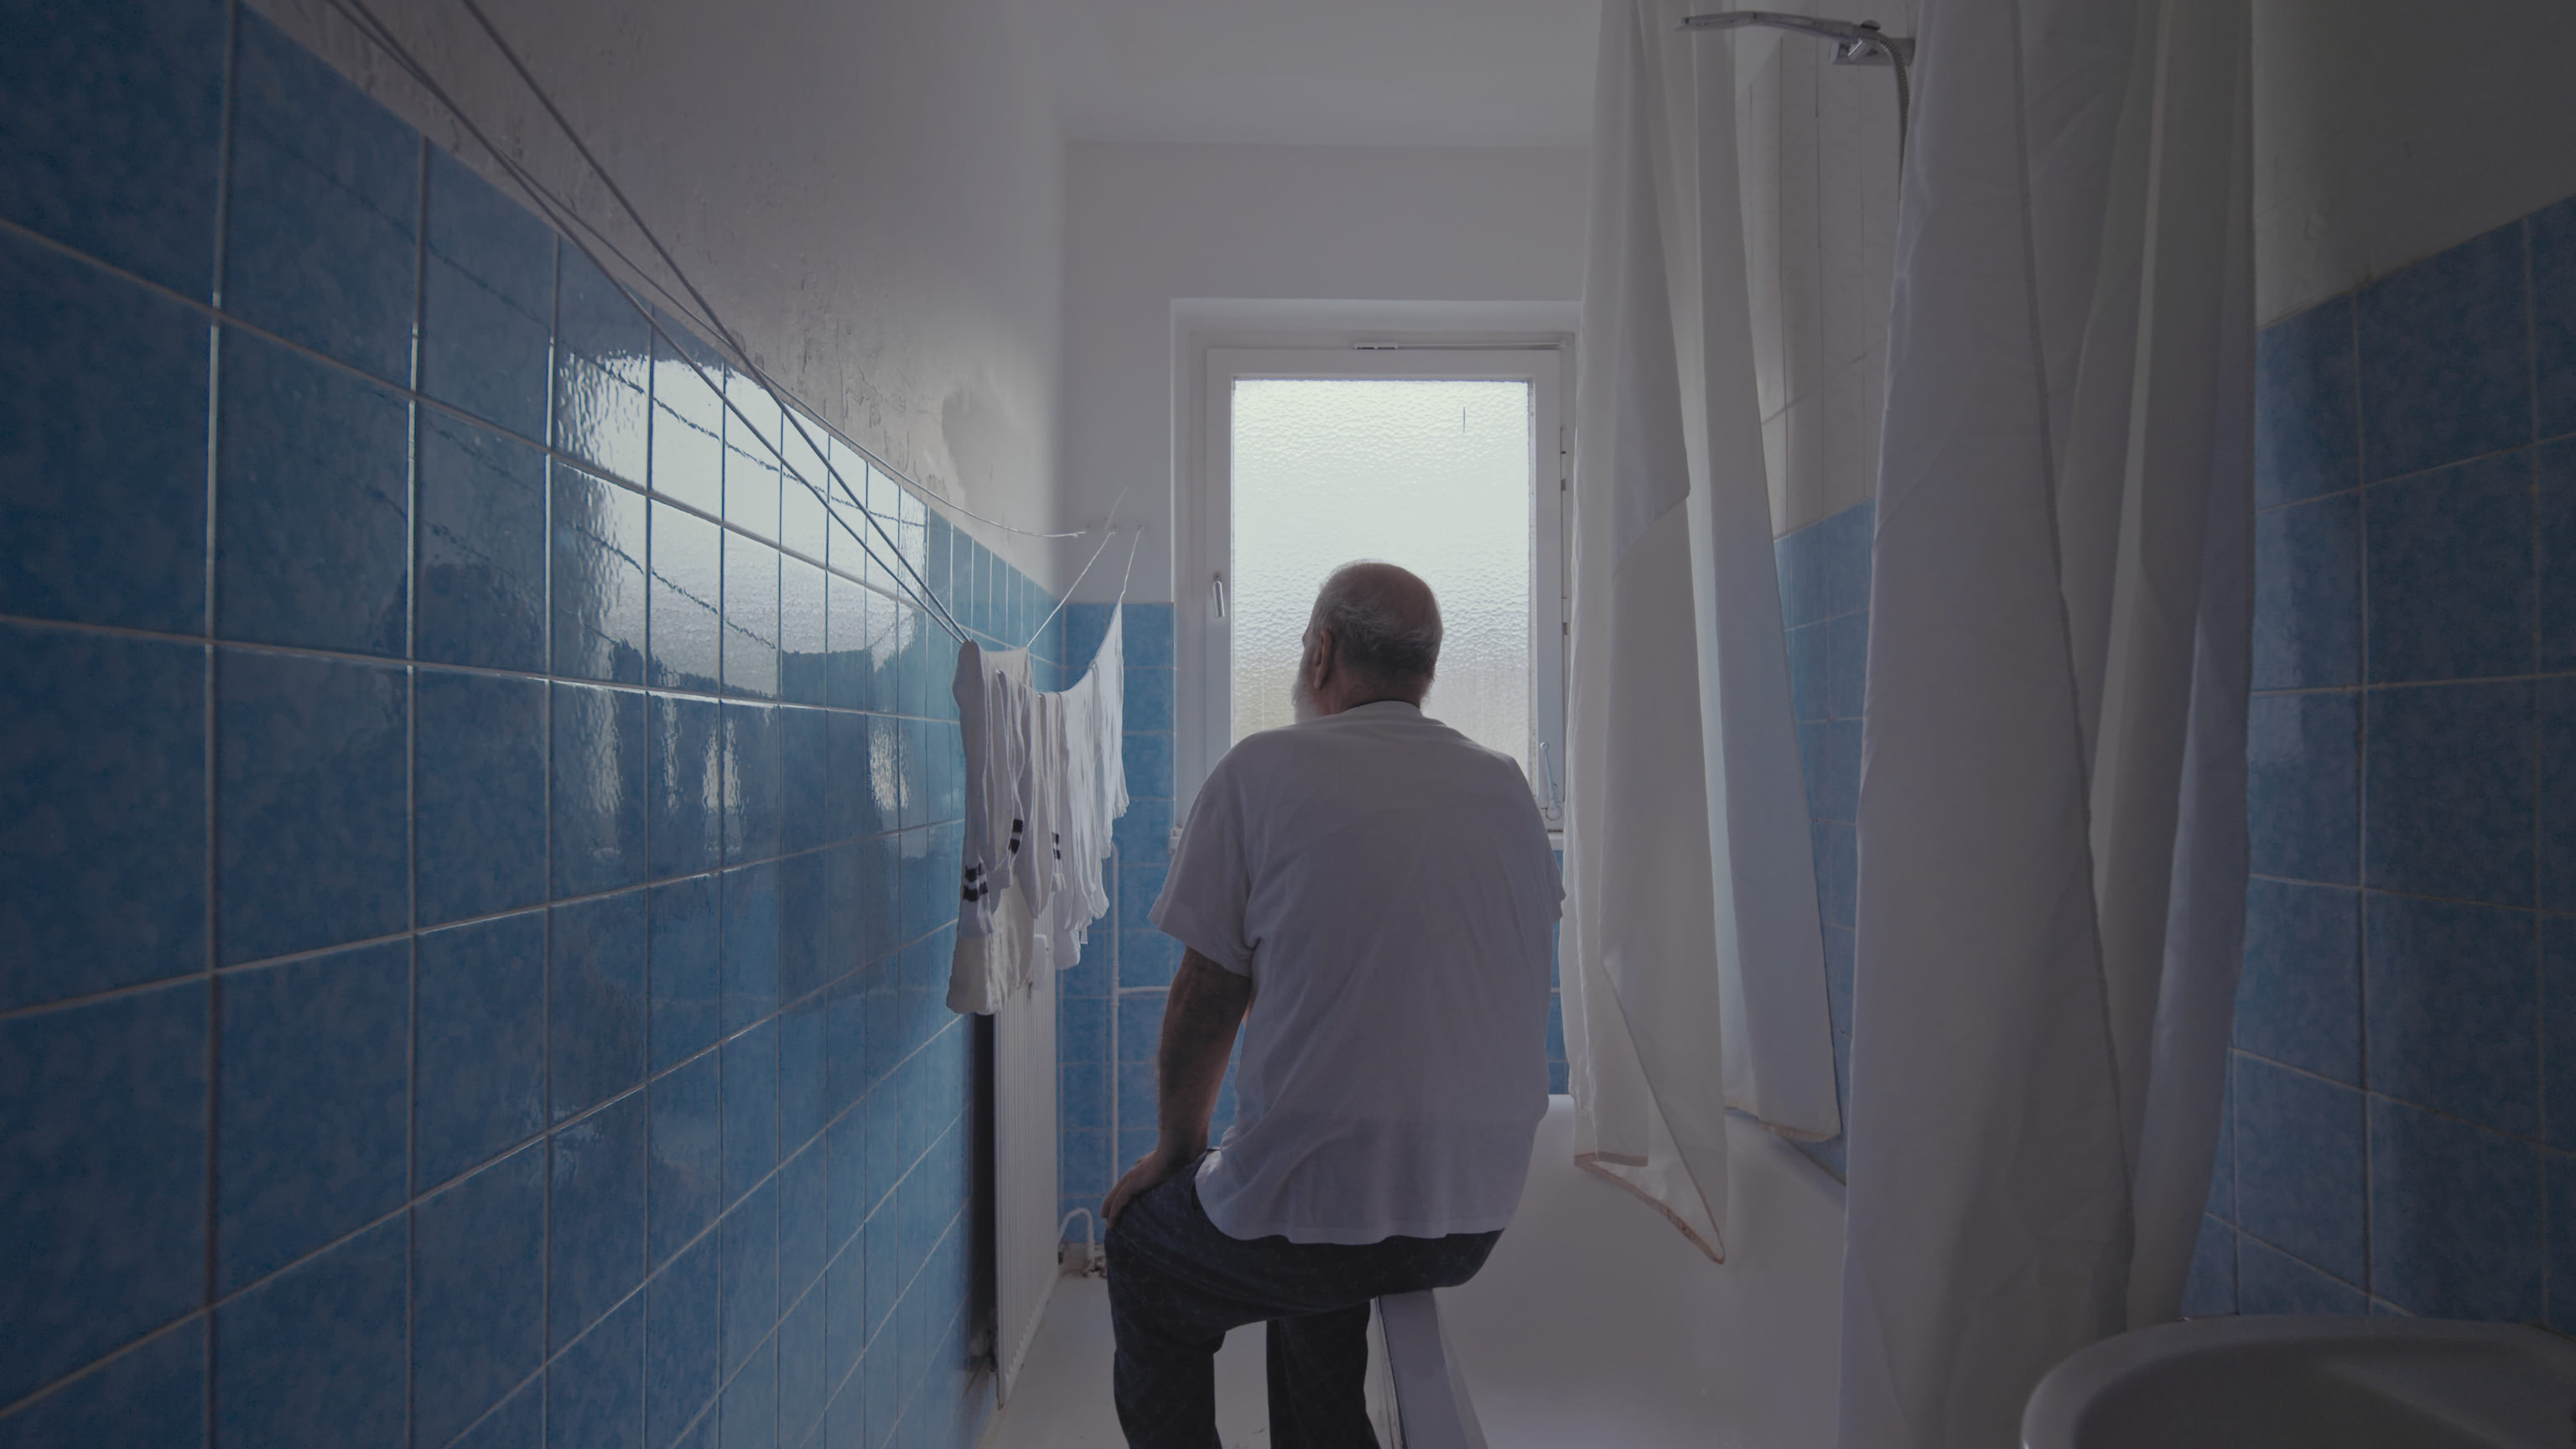 An older middle eastern man sitting on the edge of the bath tub in a bathroom with blue tiles.